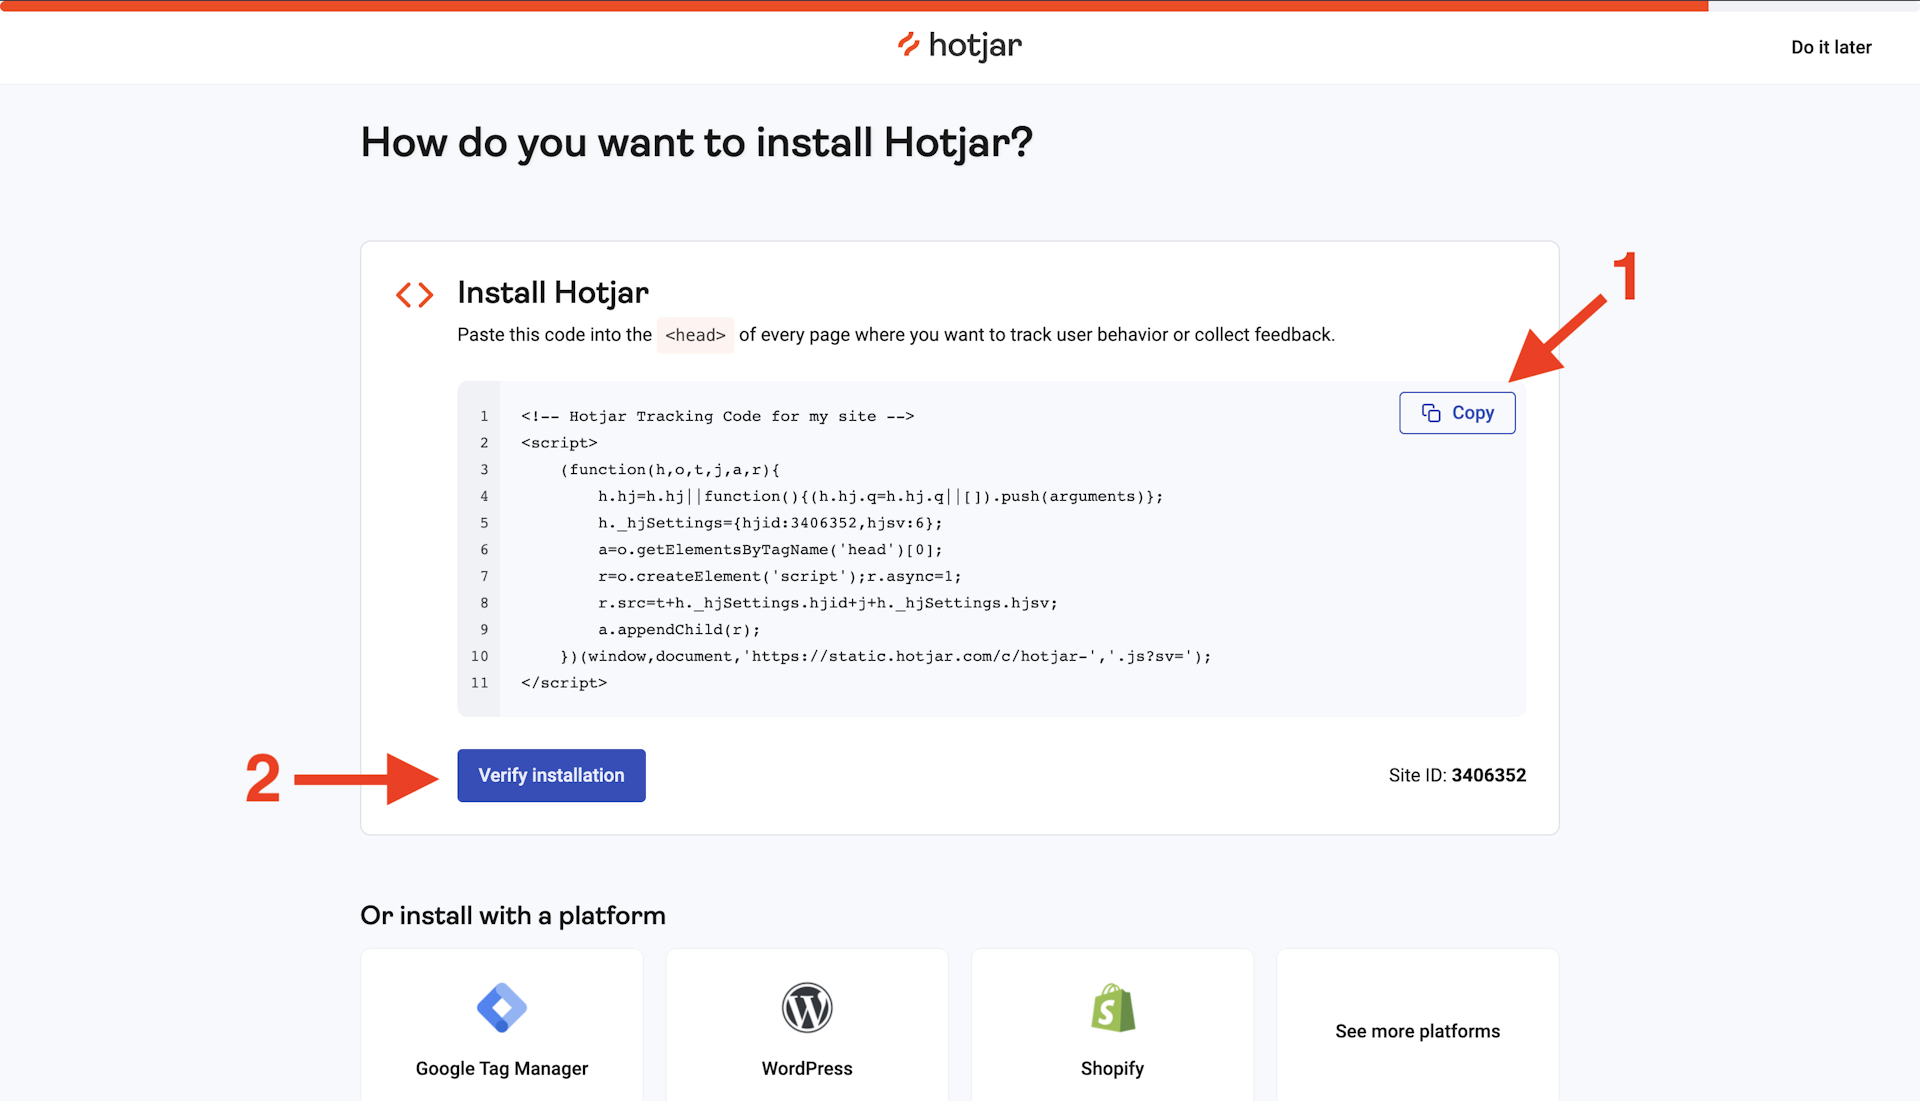 This image shows the tracking code to copy from Hotjar's website.